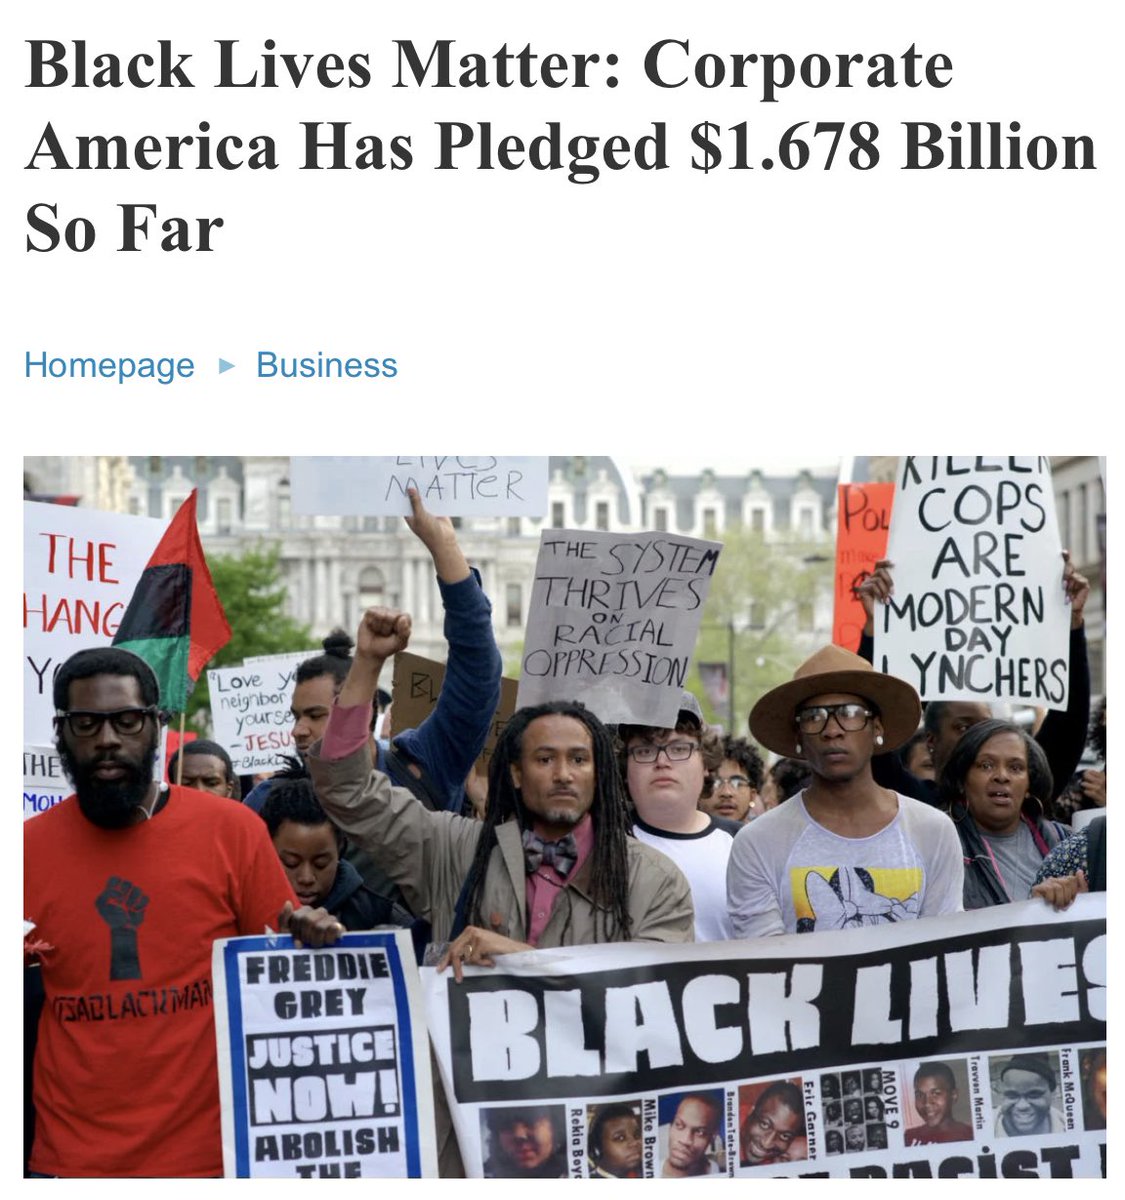 The BLM organization serves to bring the downfall of America in an effort to usher in communism. American corporations have infused BLM with millions of dollars in donations. They are literally funding a violent communist revolution.